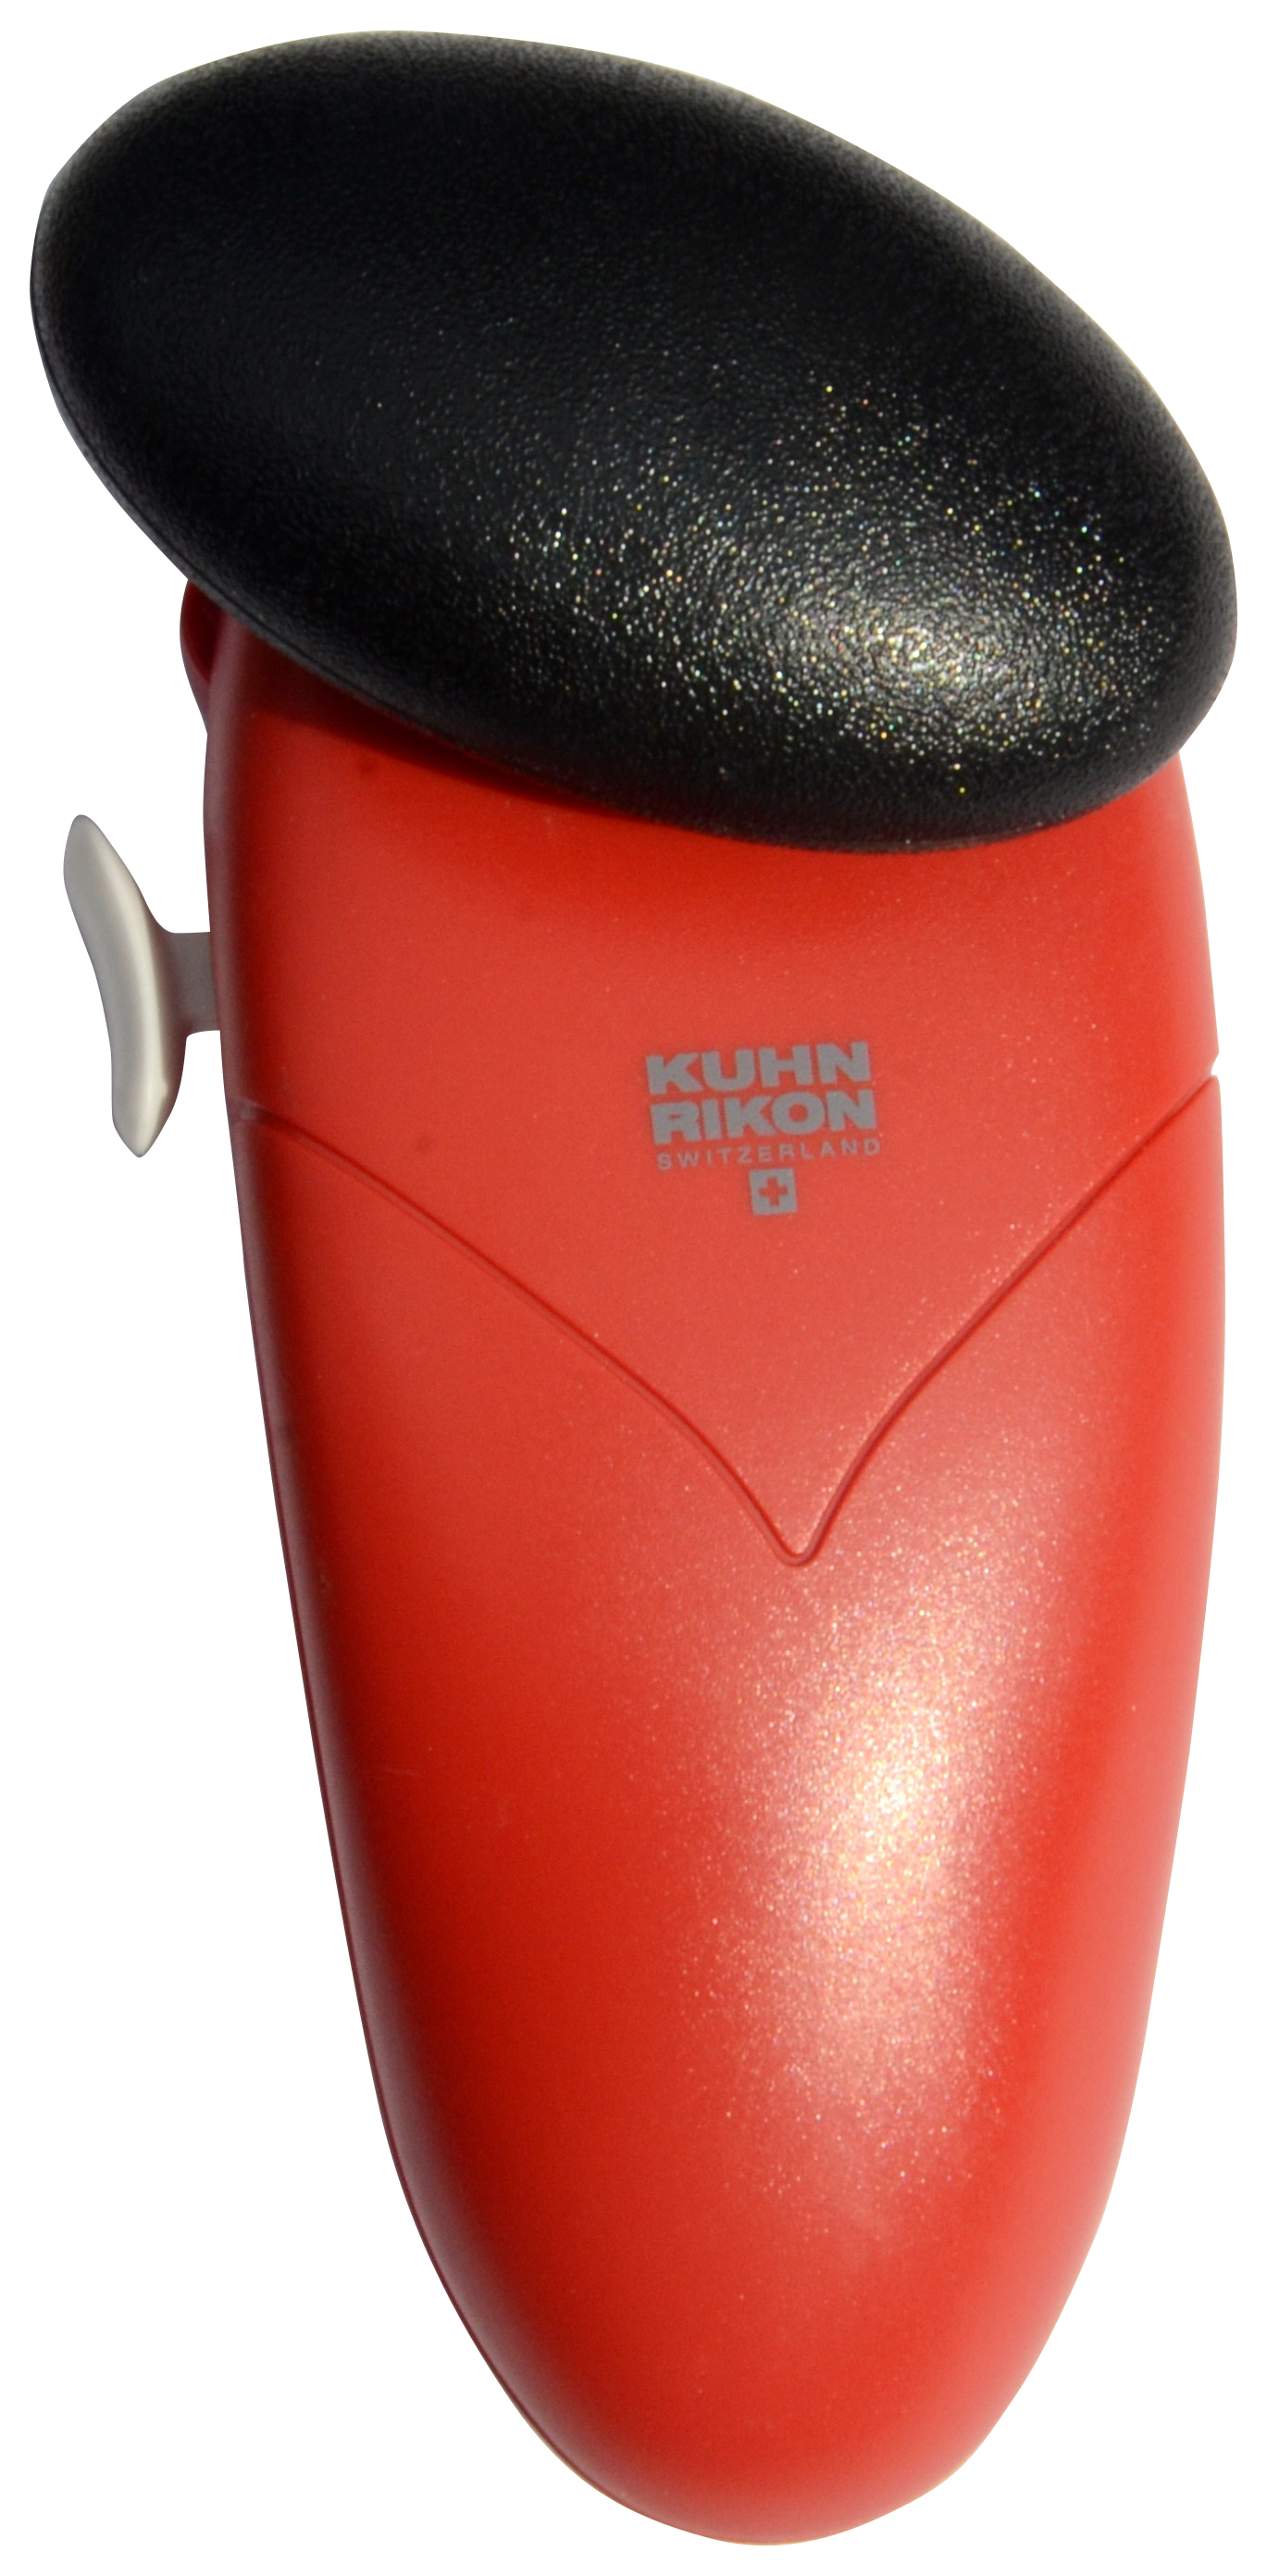 Auto Safety LidLifter/ Can Opener Red